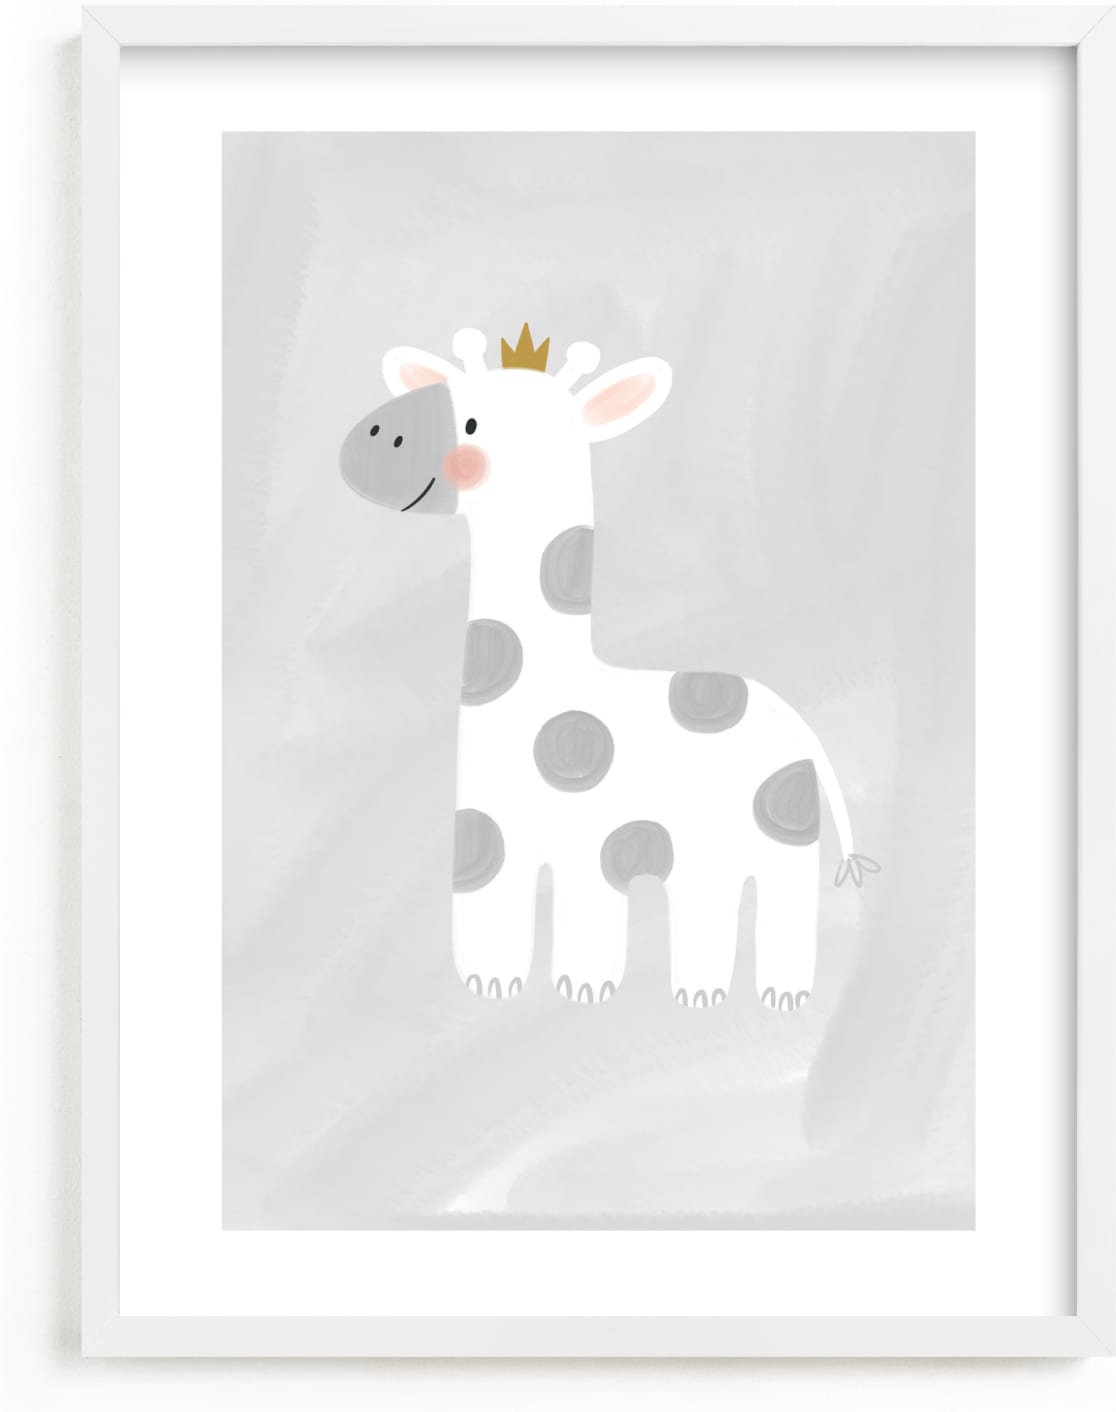 This is a white nursery wall art by Patrice Horvath called Dream Big Elephant And Giraffe.